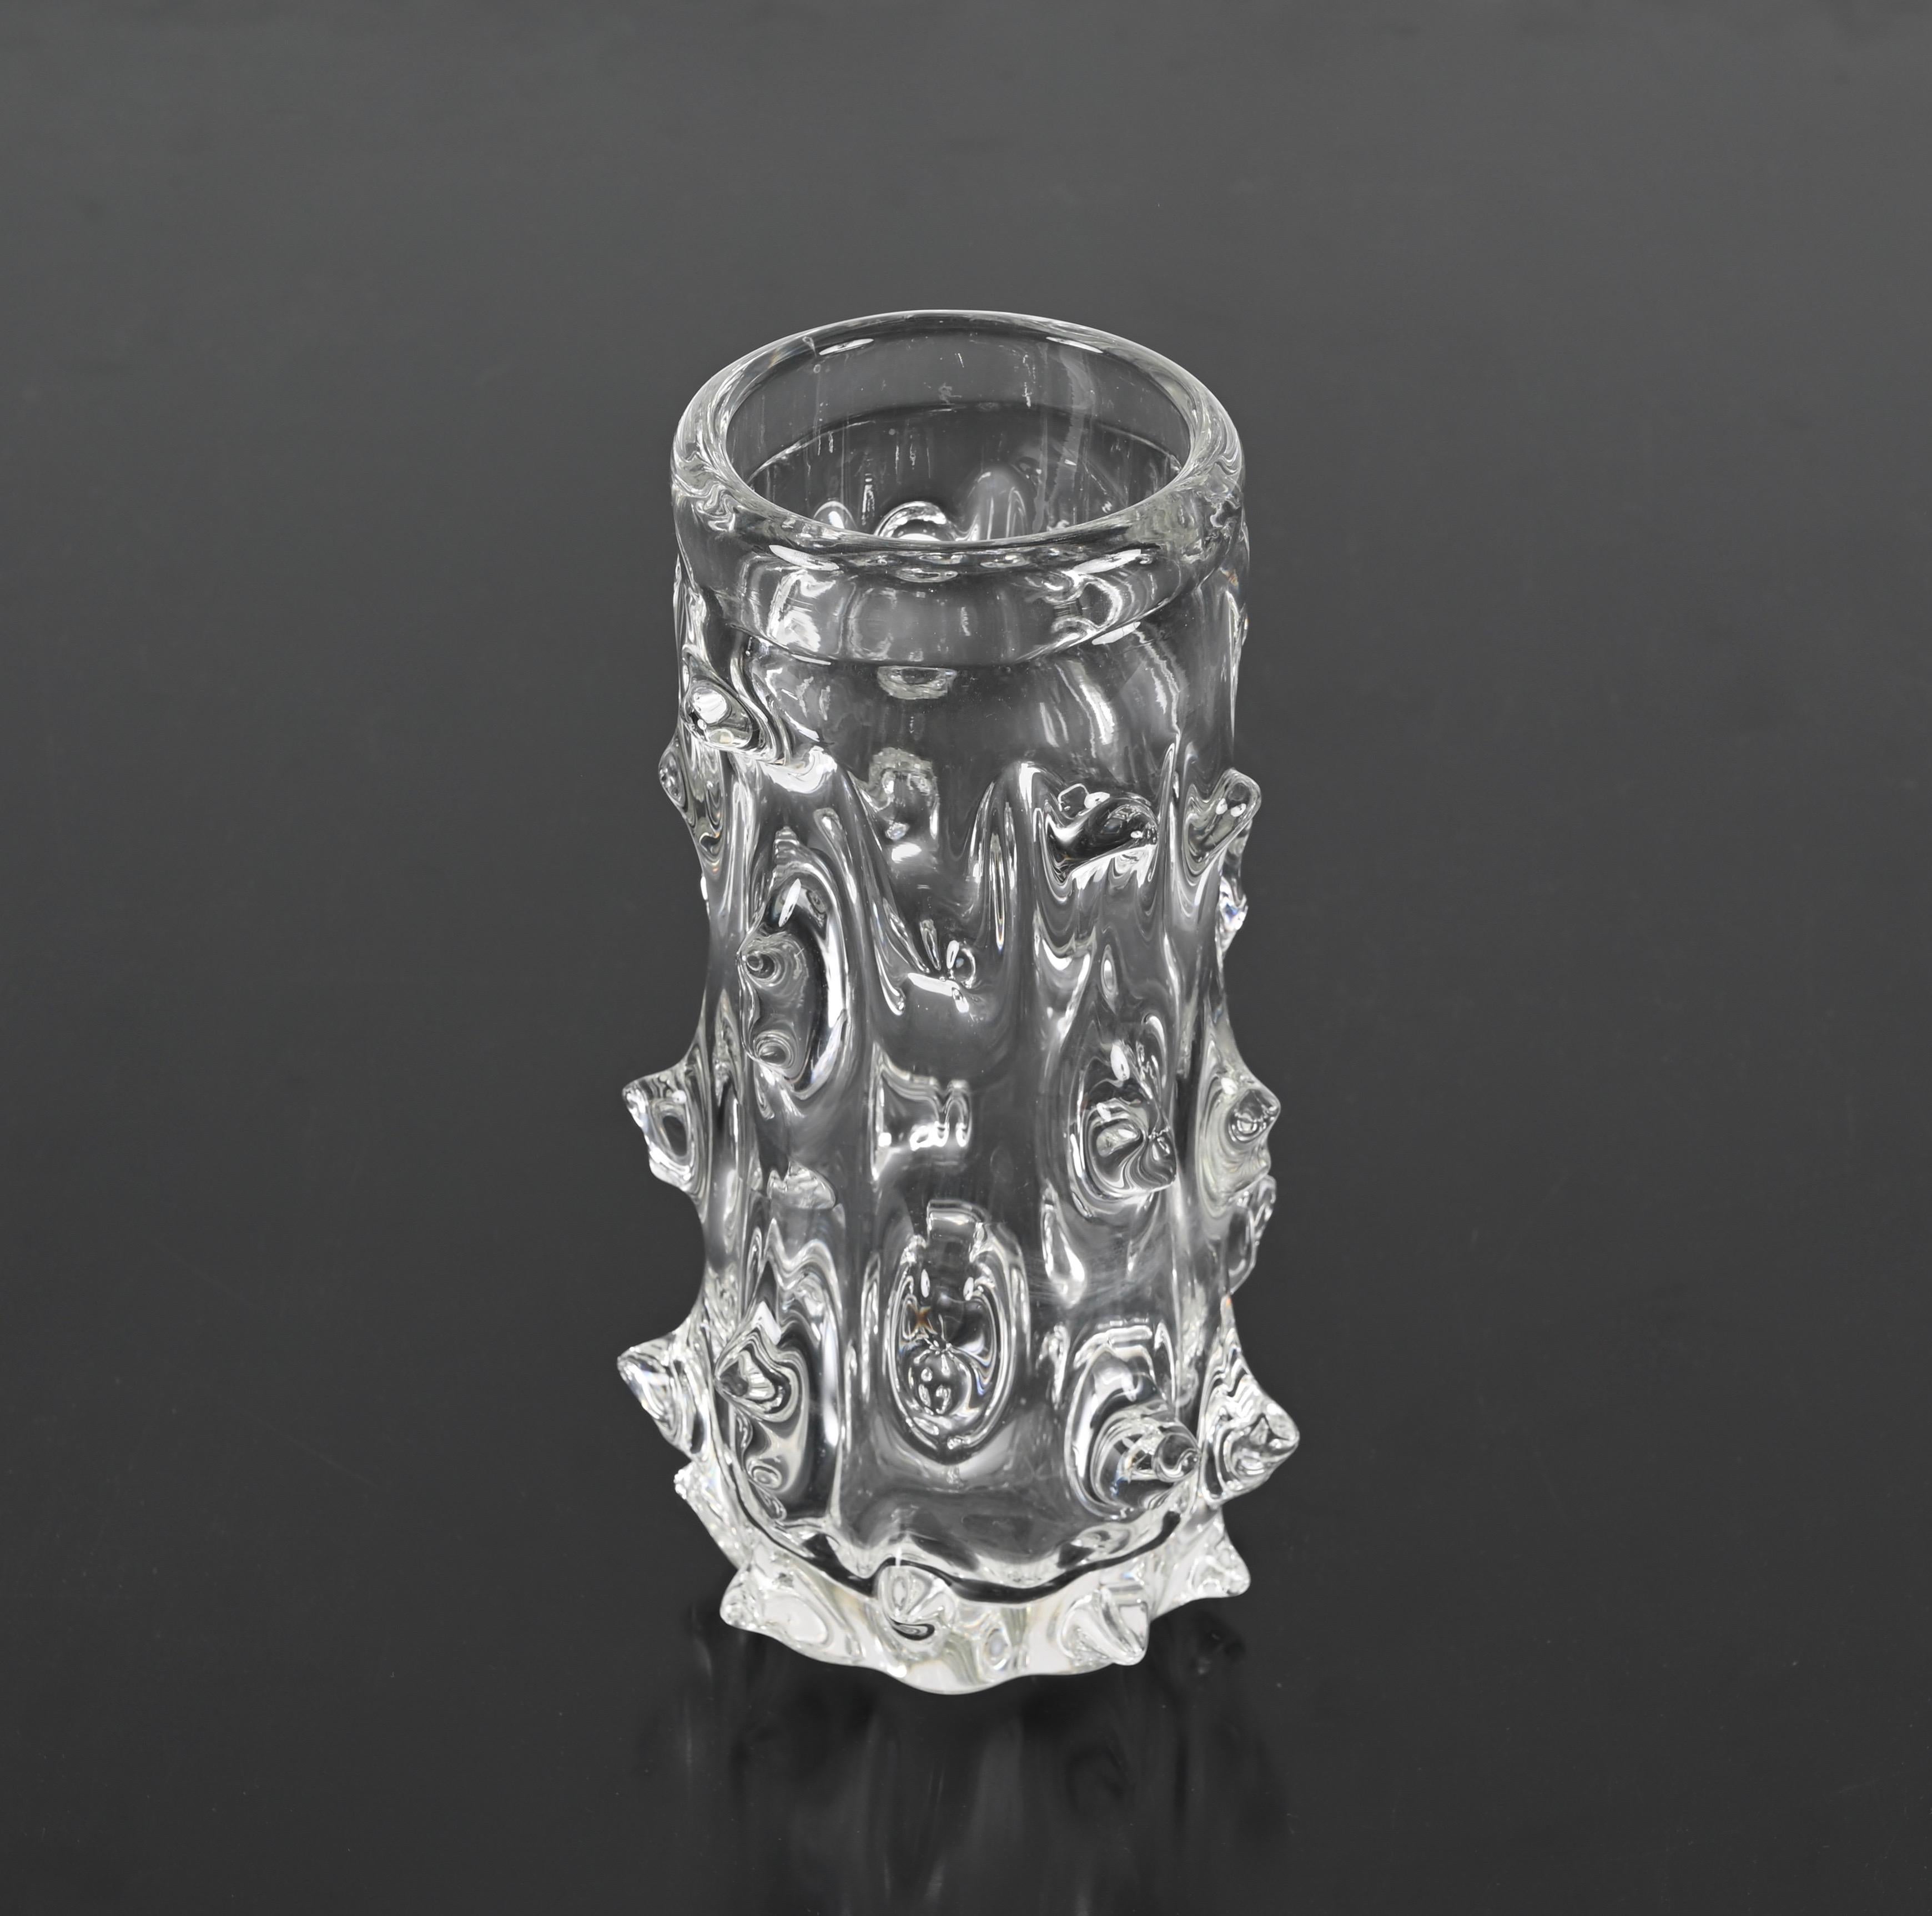 Fantastic decorative vase or flower pot made in Murano mouth-blown crystal glass with the 